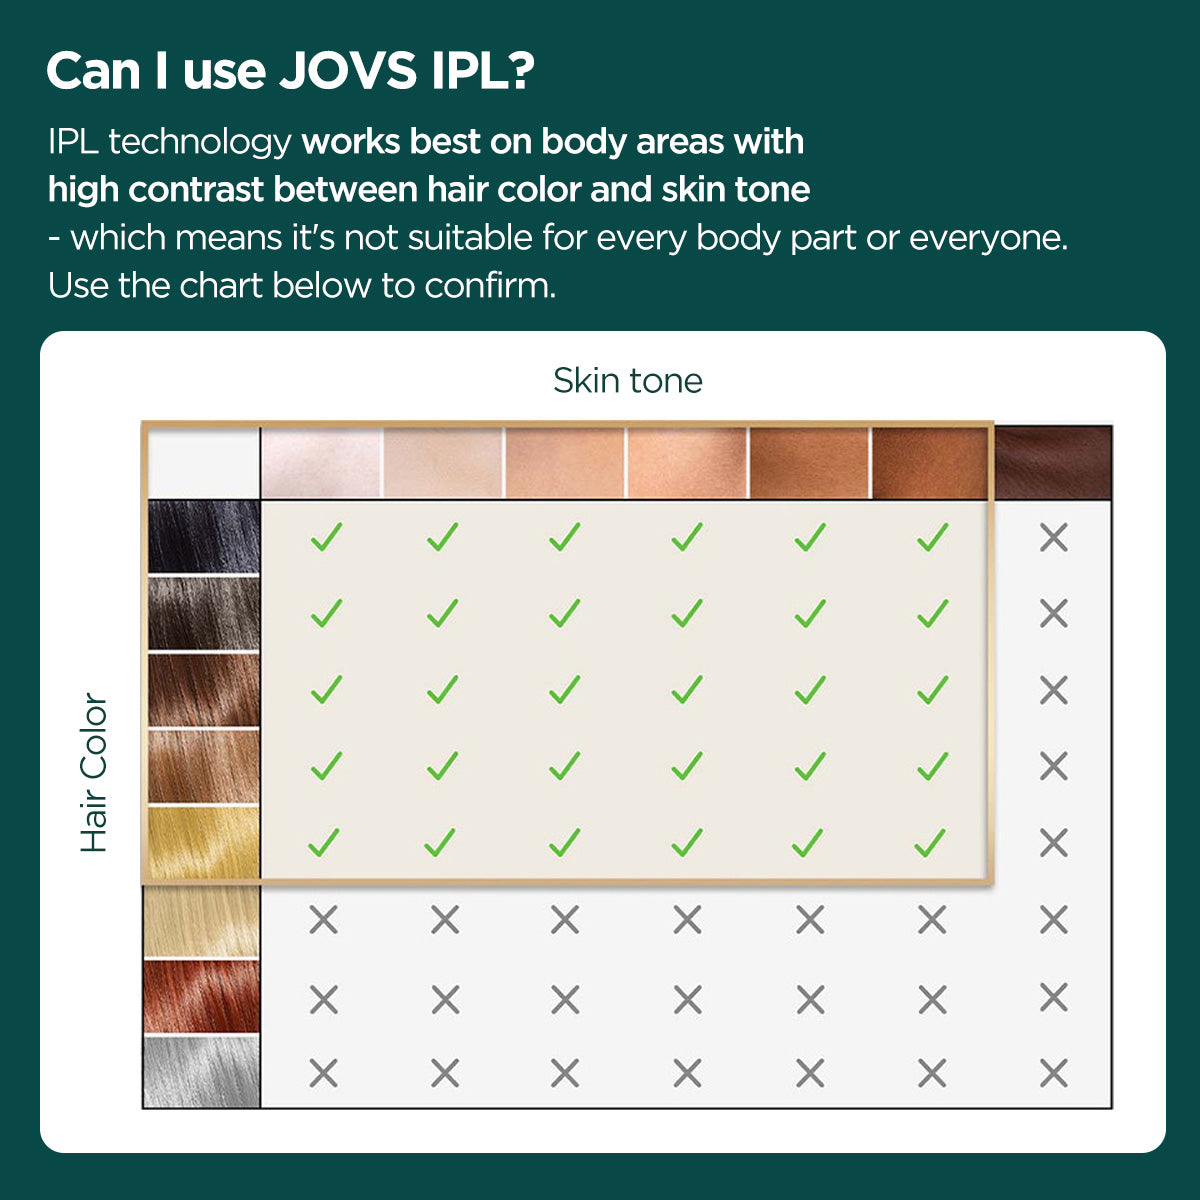 Eight hair colors and skin tones' adaptability with IPL